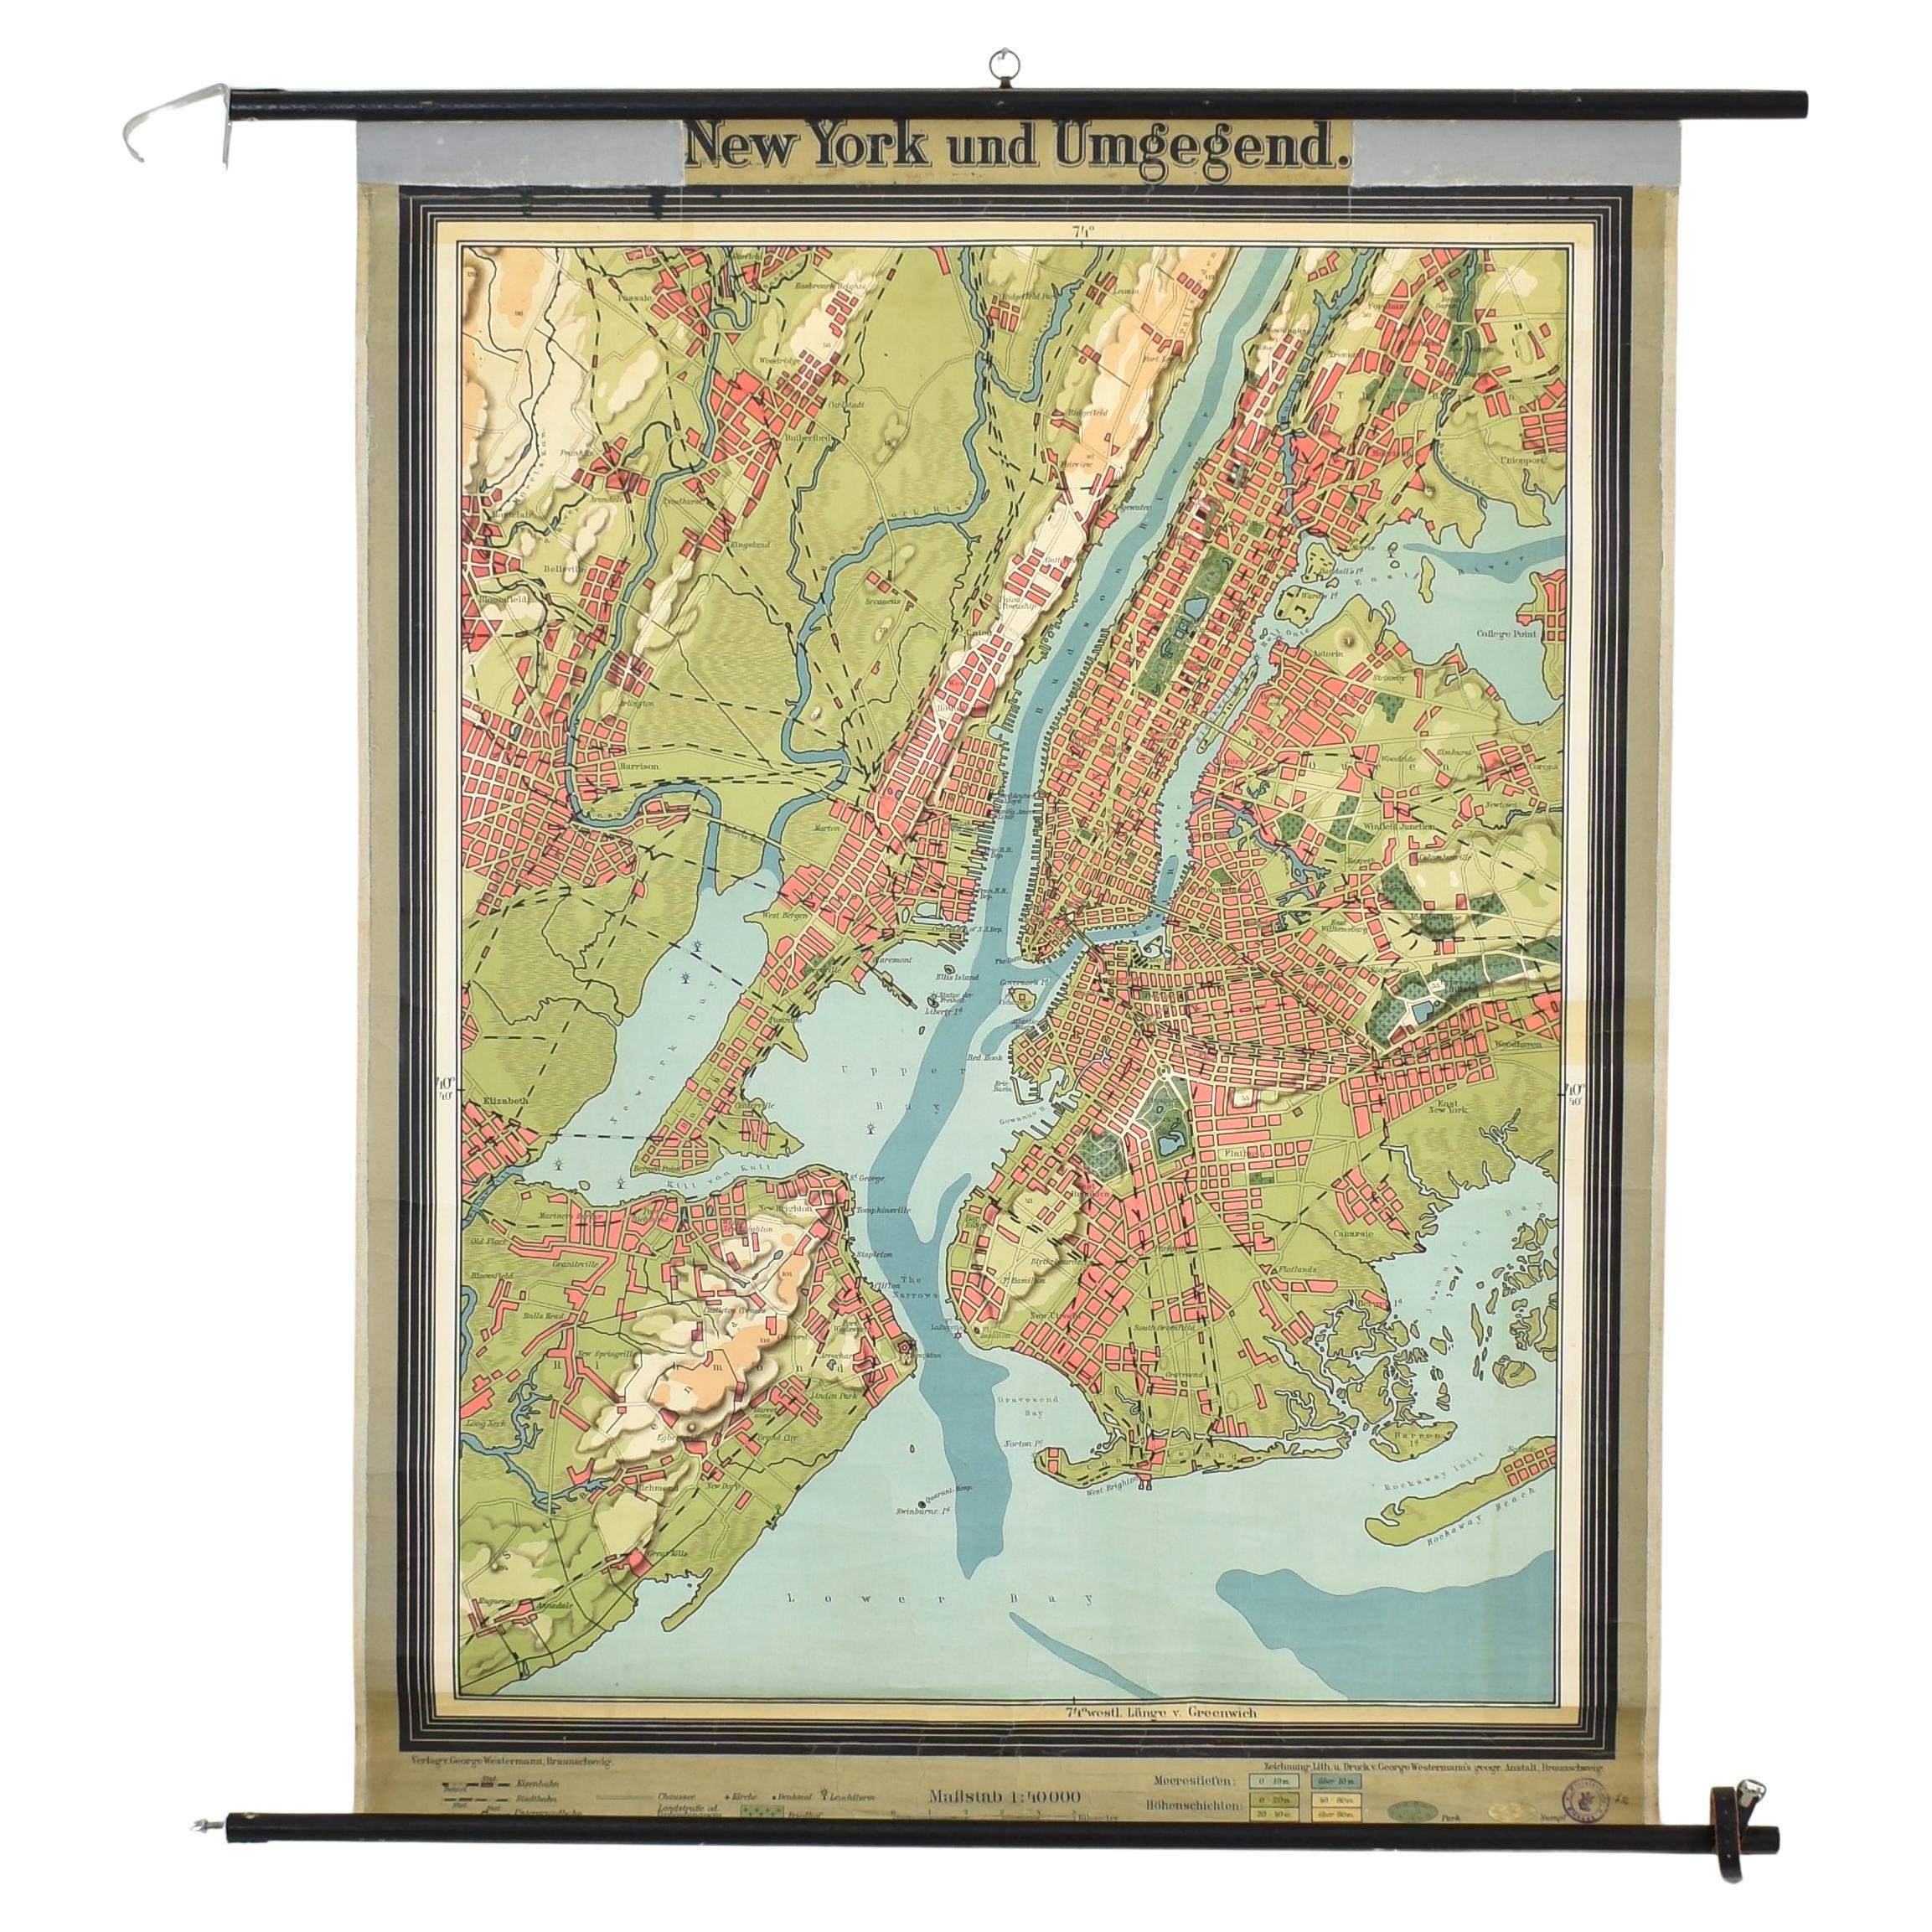 Antique New York Wall Map by Westermann